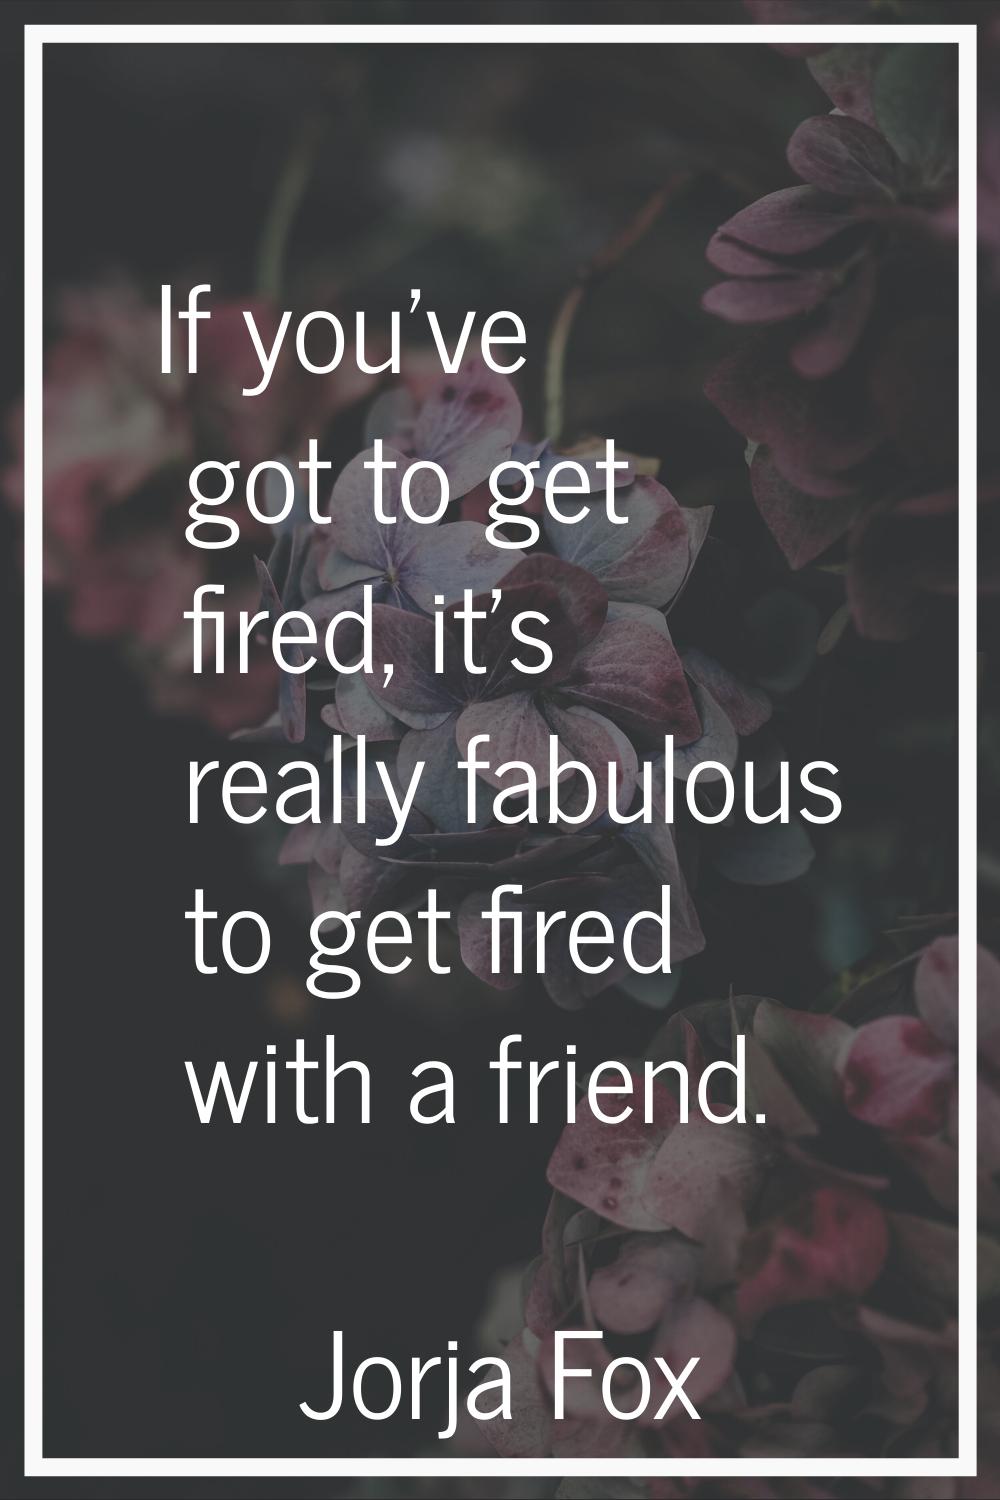 If you've got to get fired, it's really fabulous to get fired with a friend.